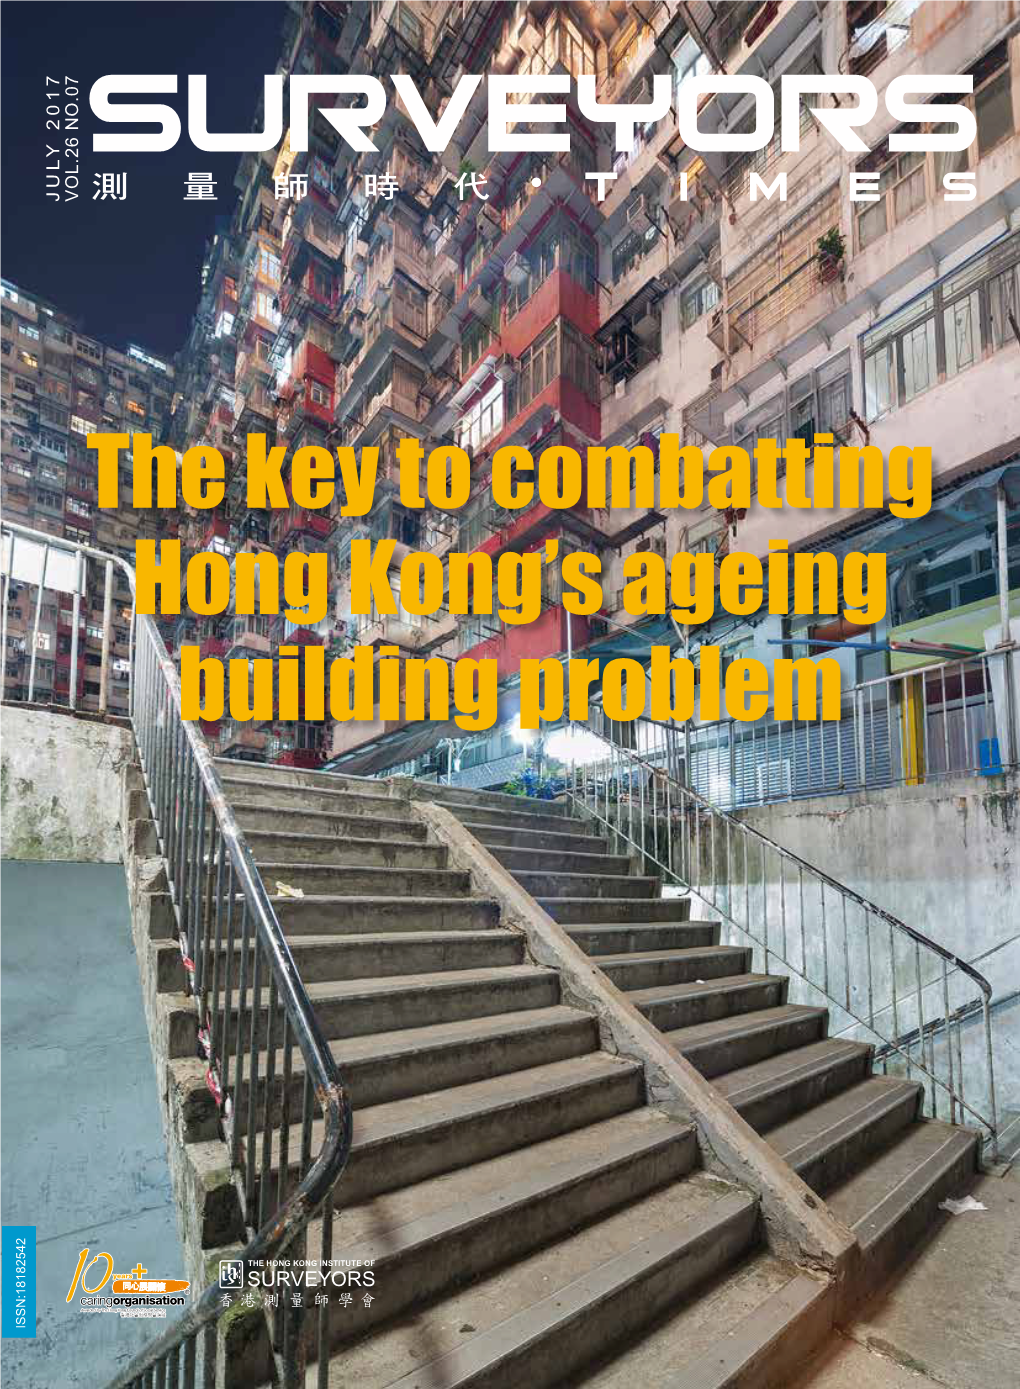 The Key to Combatting Hong Kong's Ageing Building Problem